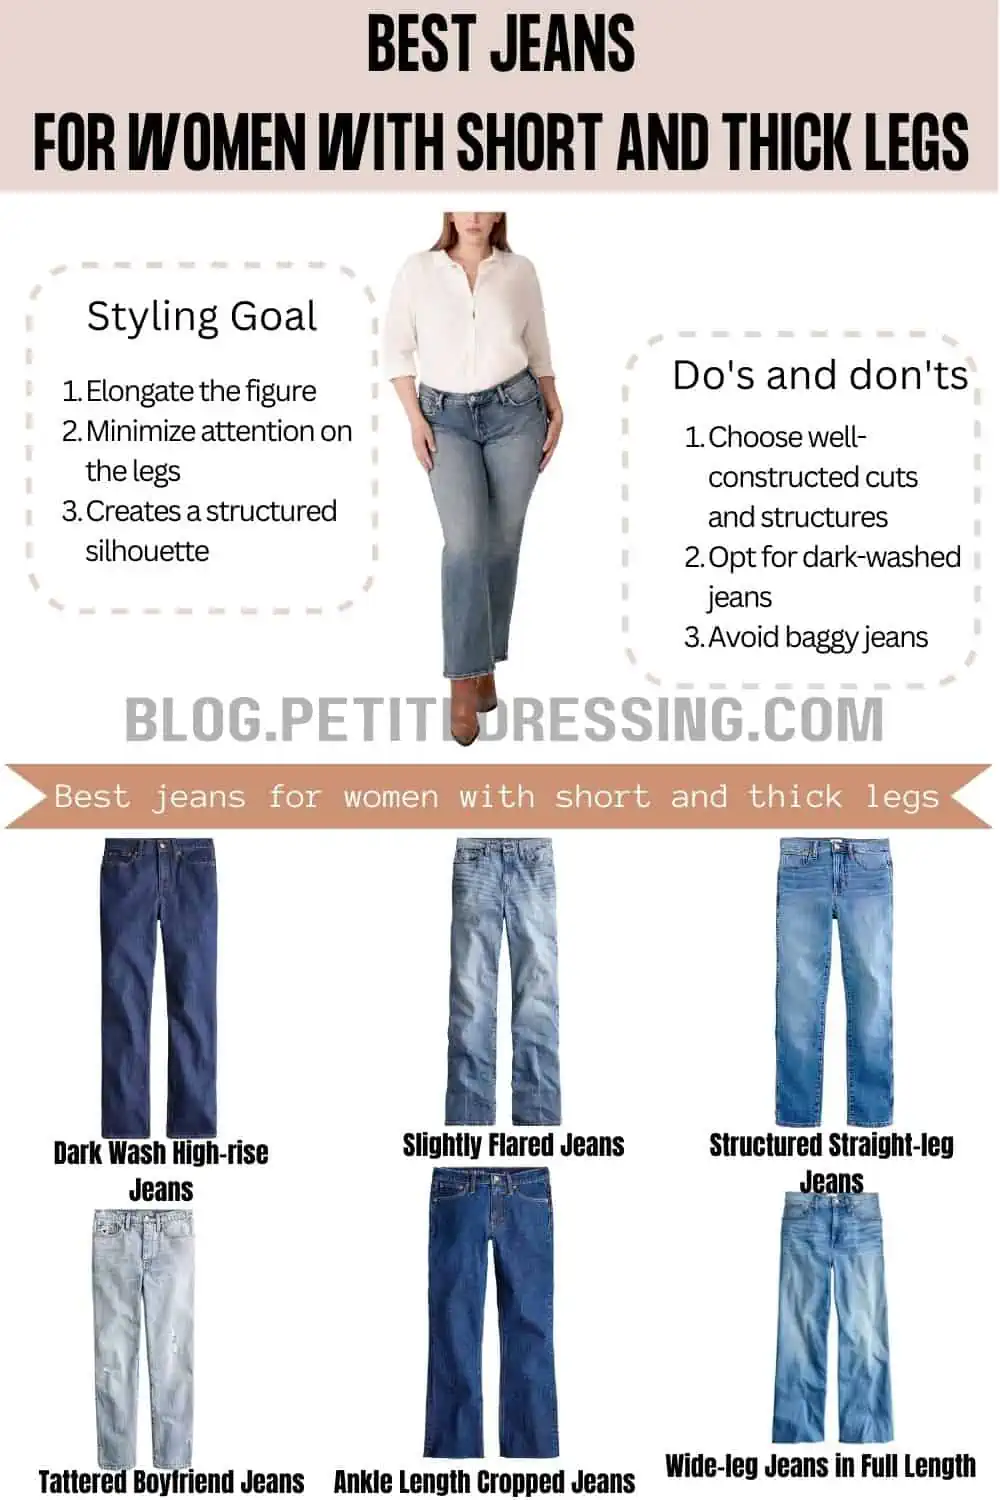 Jeans Style Guide for Women with Short and Thick Legs - Petite